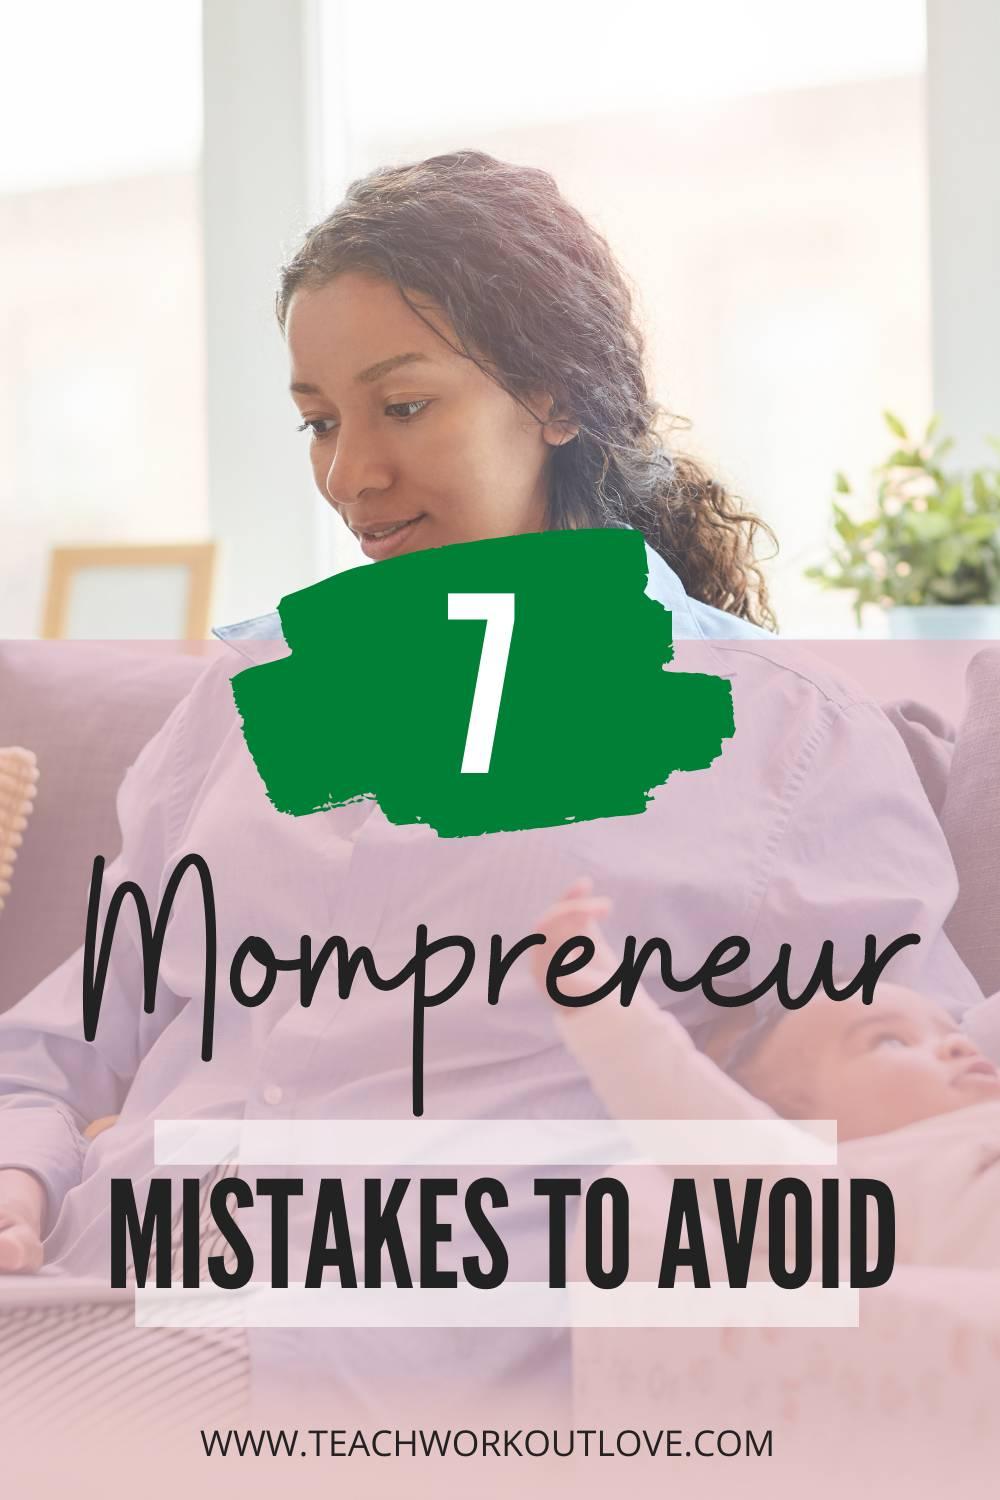 Running a business while carrying out the duties of being a mom isn’t easy, but it can be done. In fact, there are many successful entrepreneurs out there who started a business after having children. Below are a few mistakes to avoid when starting a business as a mom.